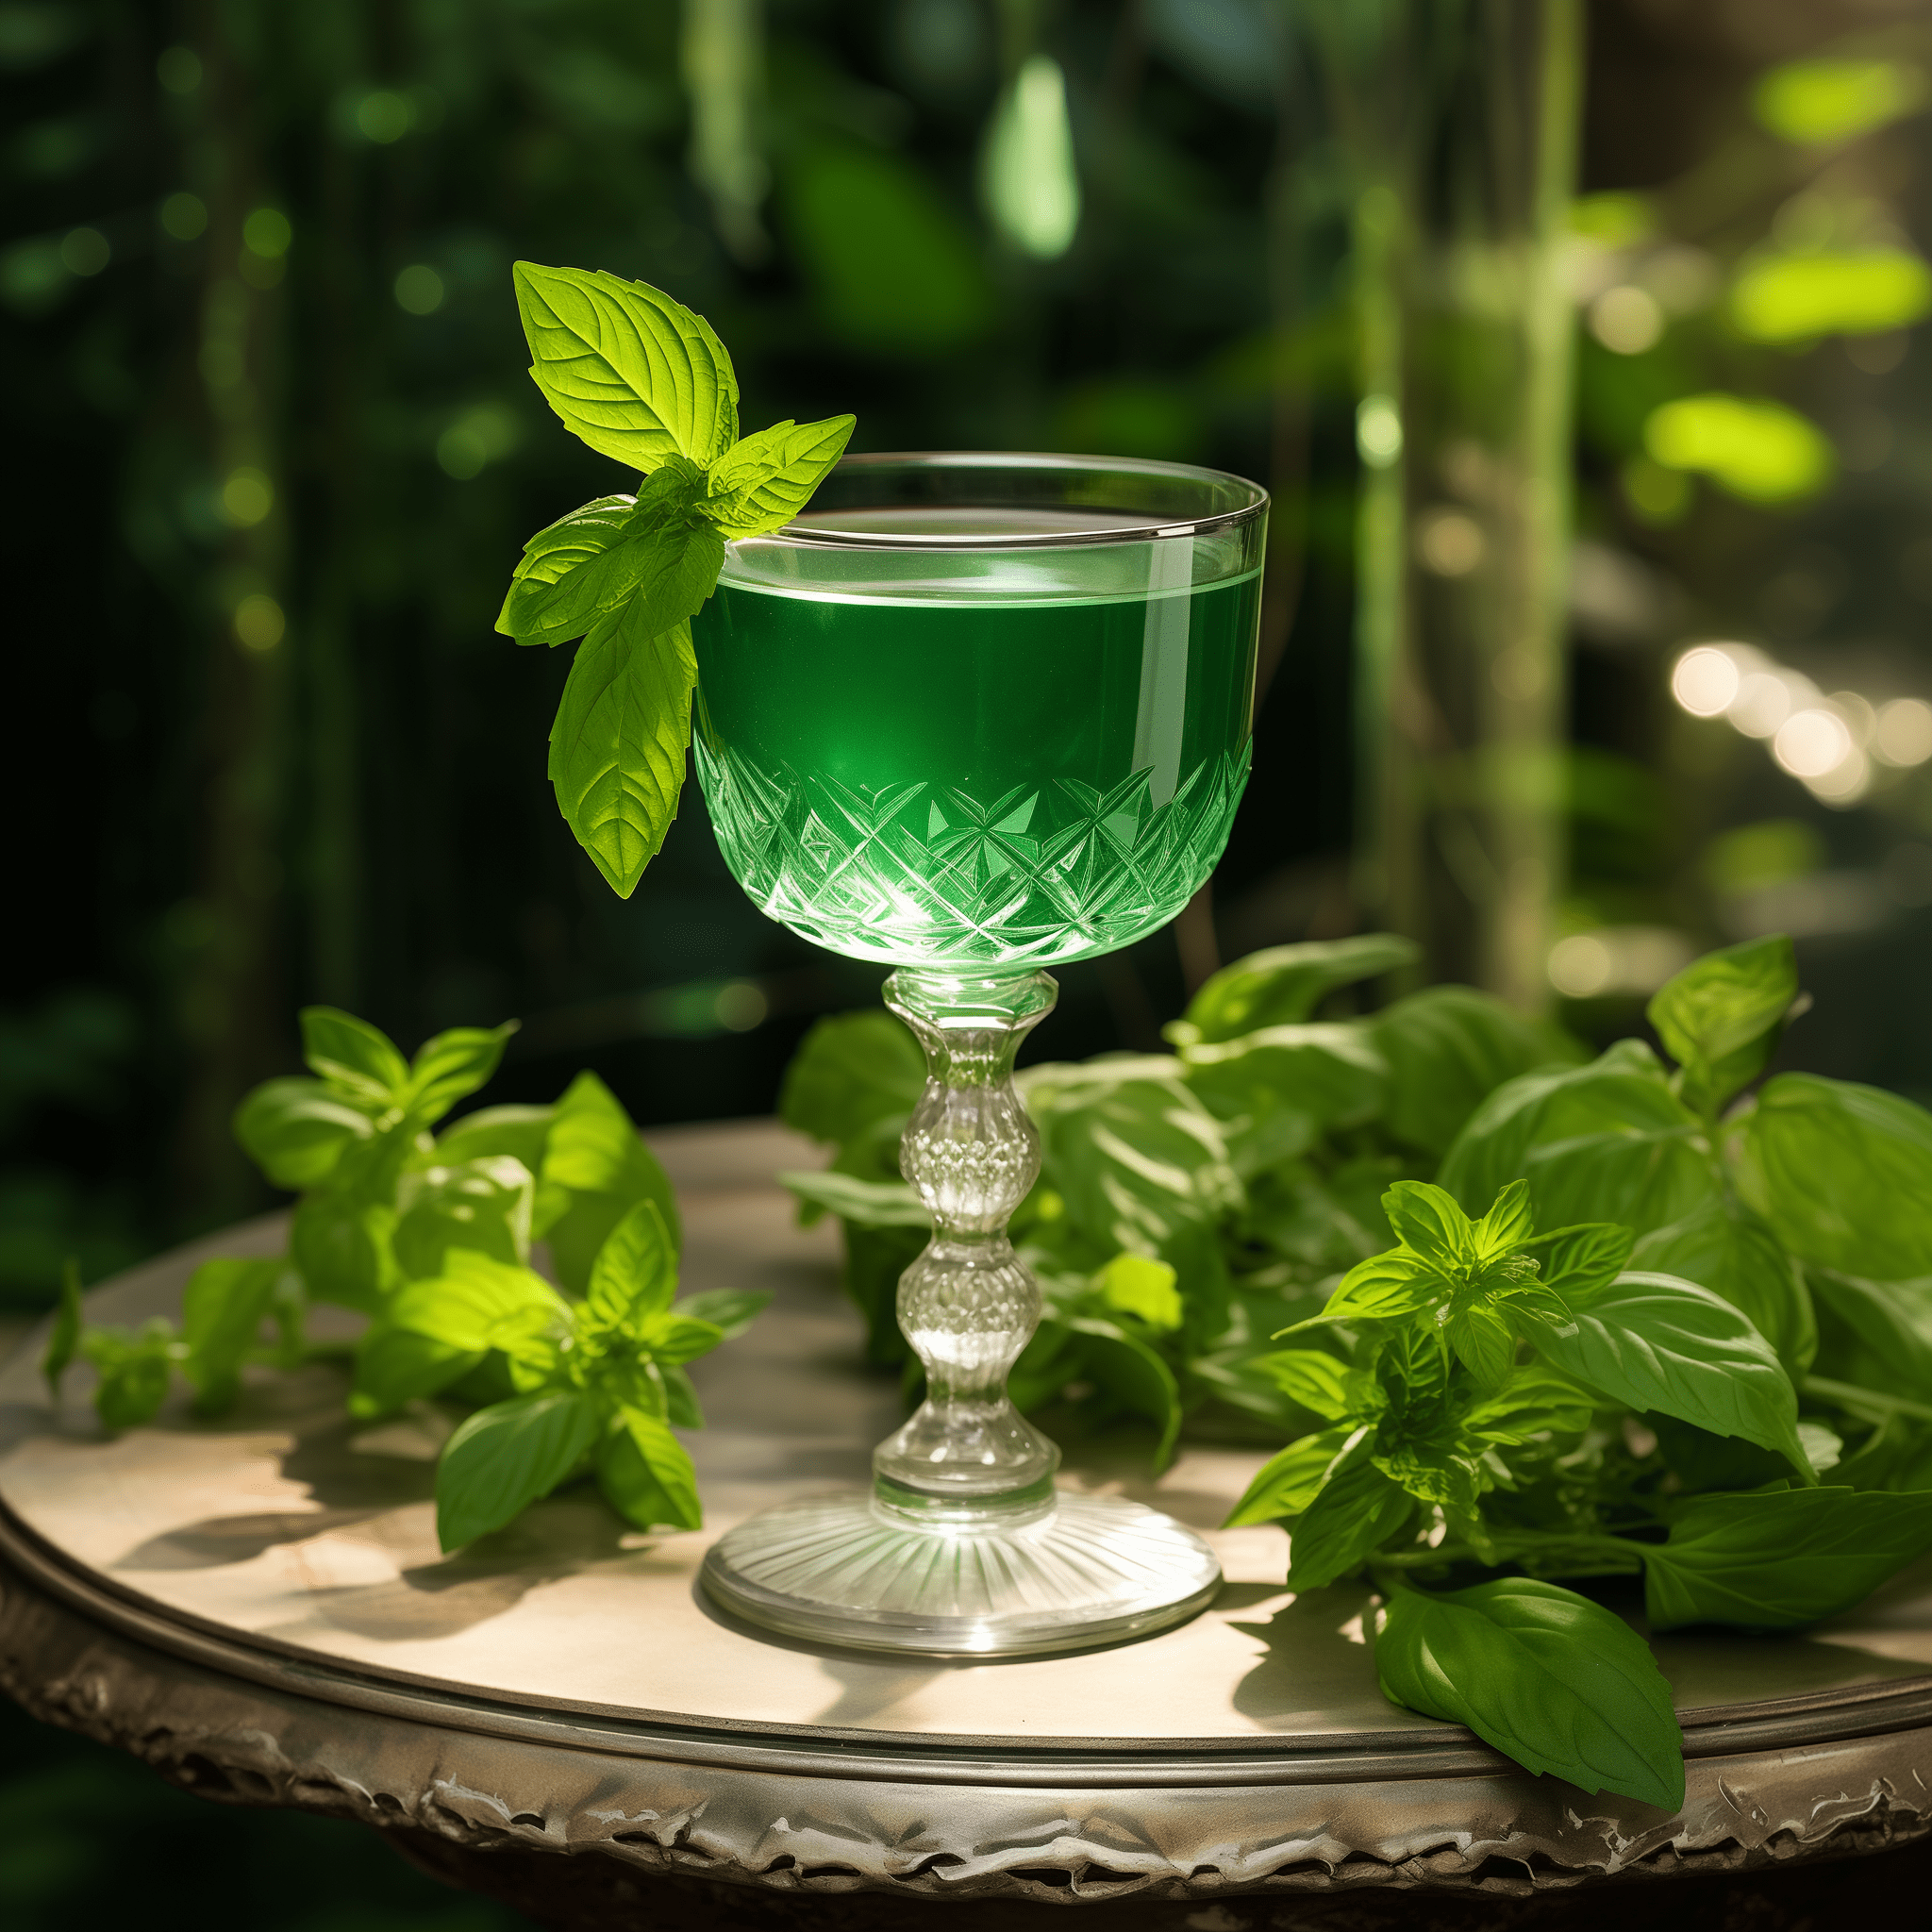 Poison Ivy Cocktail Recipe - The Poison Ivy cocktail offers a tantalizing balance of flavors. It's herbaceous and slightly sweet, with a refreshing citrus tang and a subtle hint of anise from the absinthe. The basil leaves add a fresh aromatic quality that complements the sharpness of the lime juice.